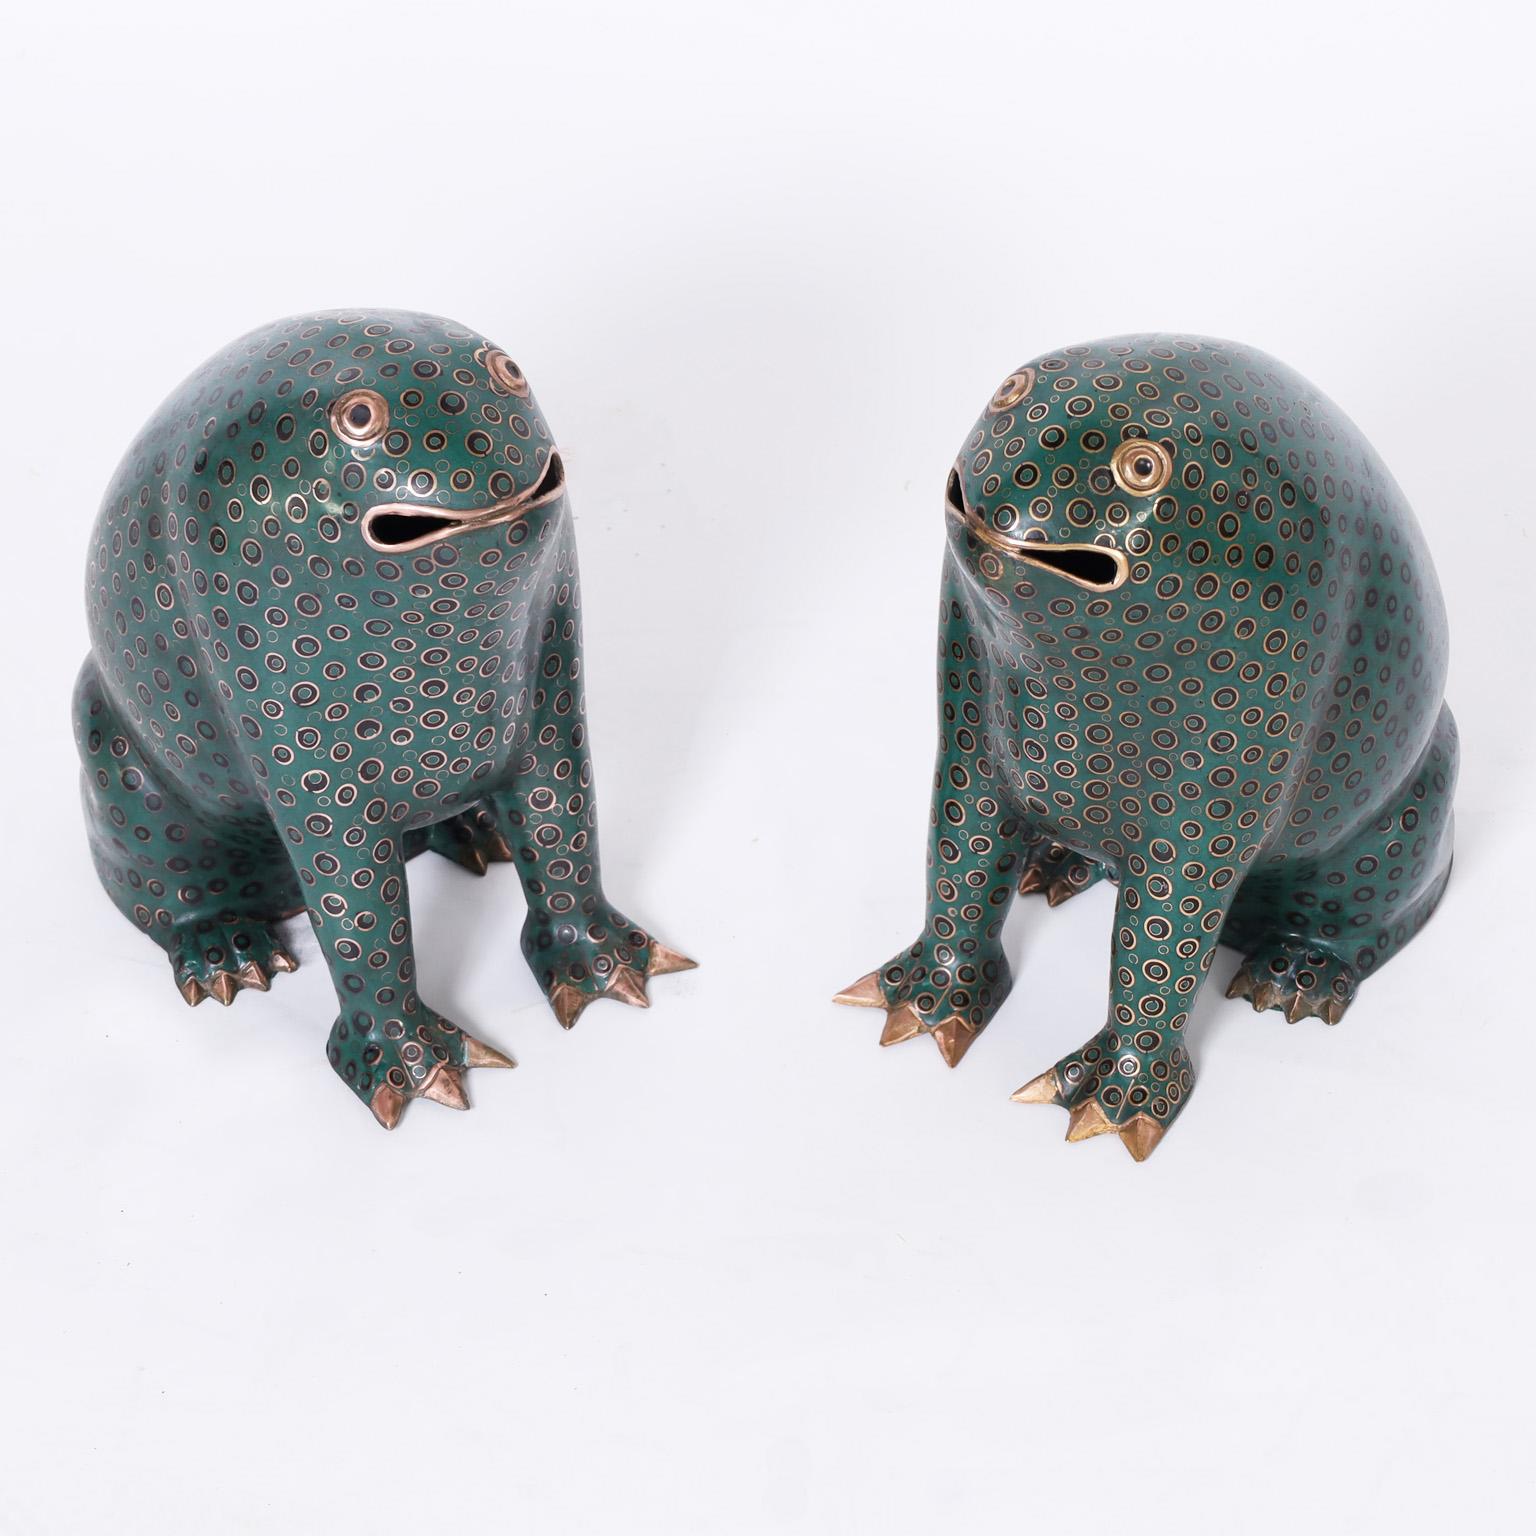 Rare and remarkable pair of whimsical Chinese cloisonné or enamel on brass frogs with a stylized form and decorated with repeating spots on a green background.